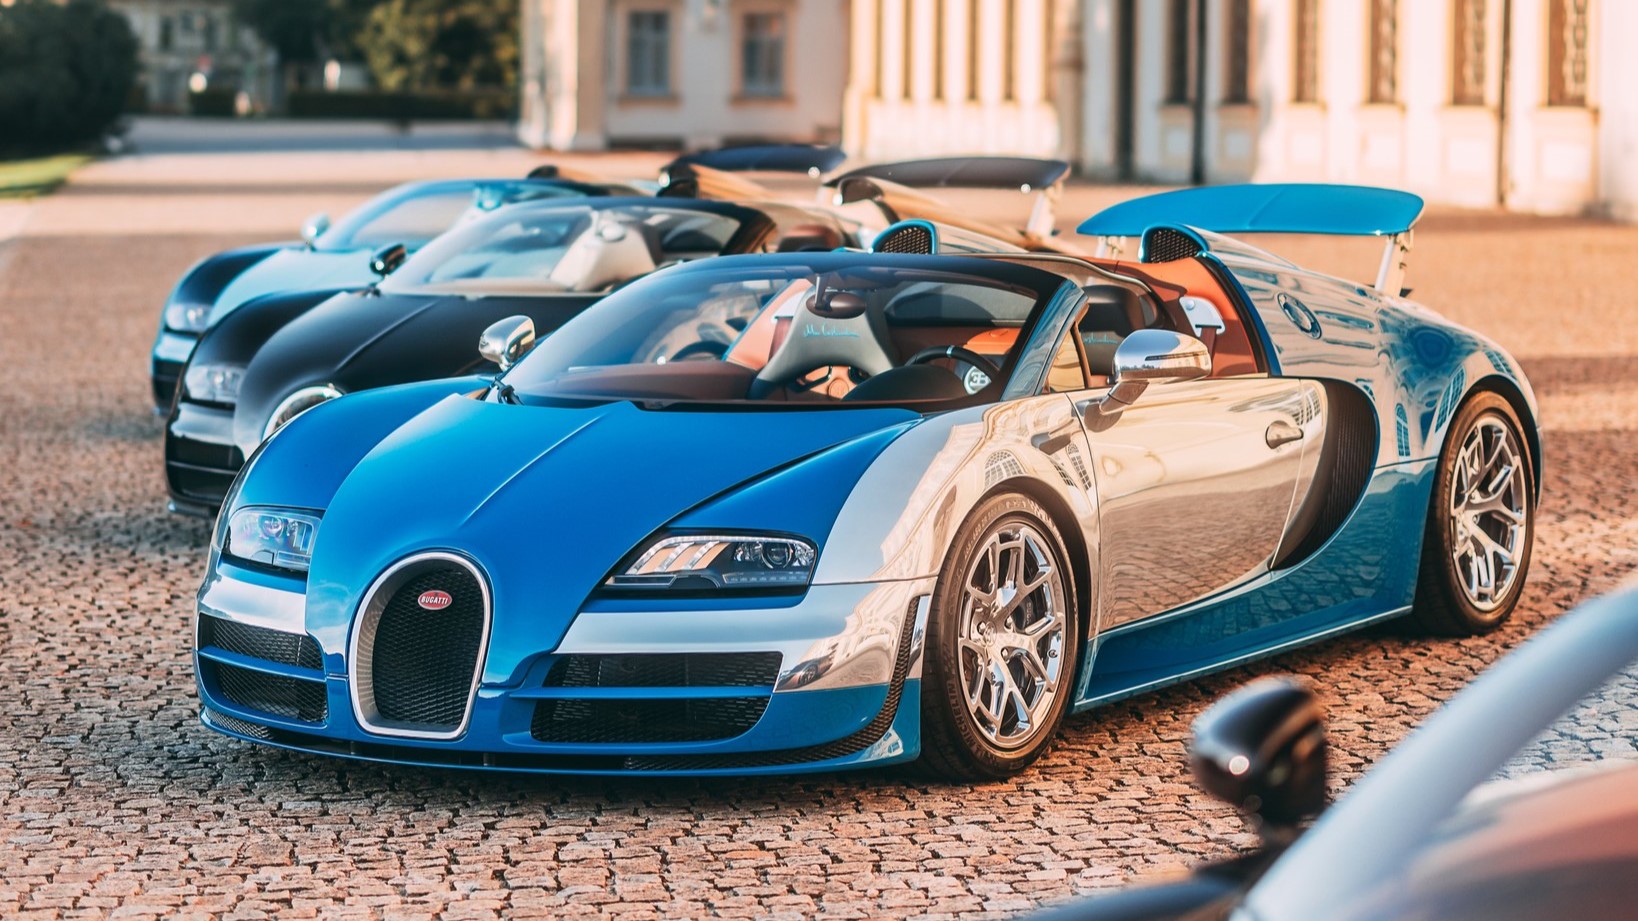 No info yet on four Bugatti Veyrons seized by German graftbusters as part of 1MDB probe: IGP